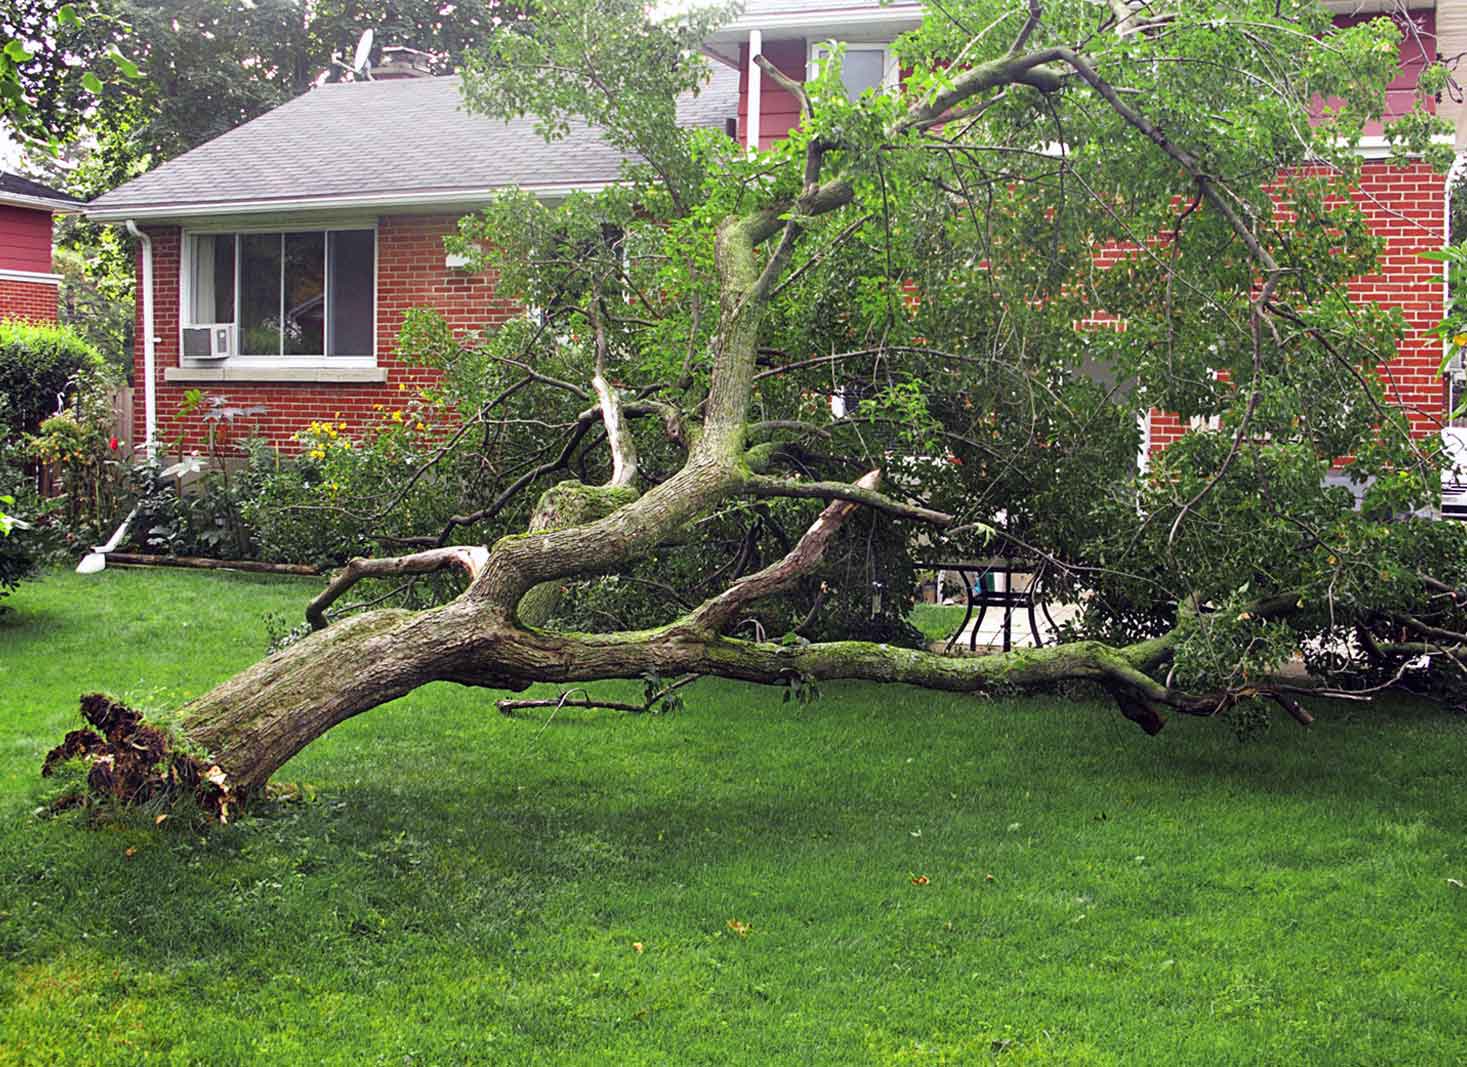 Does Home Insurance Cover Tree Damage